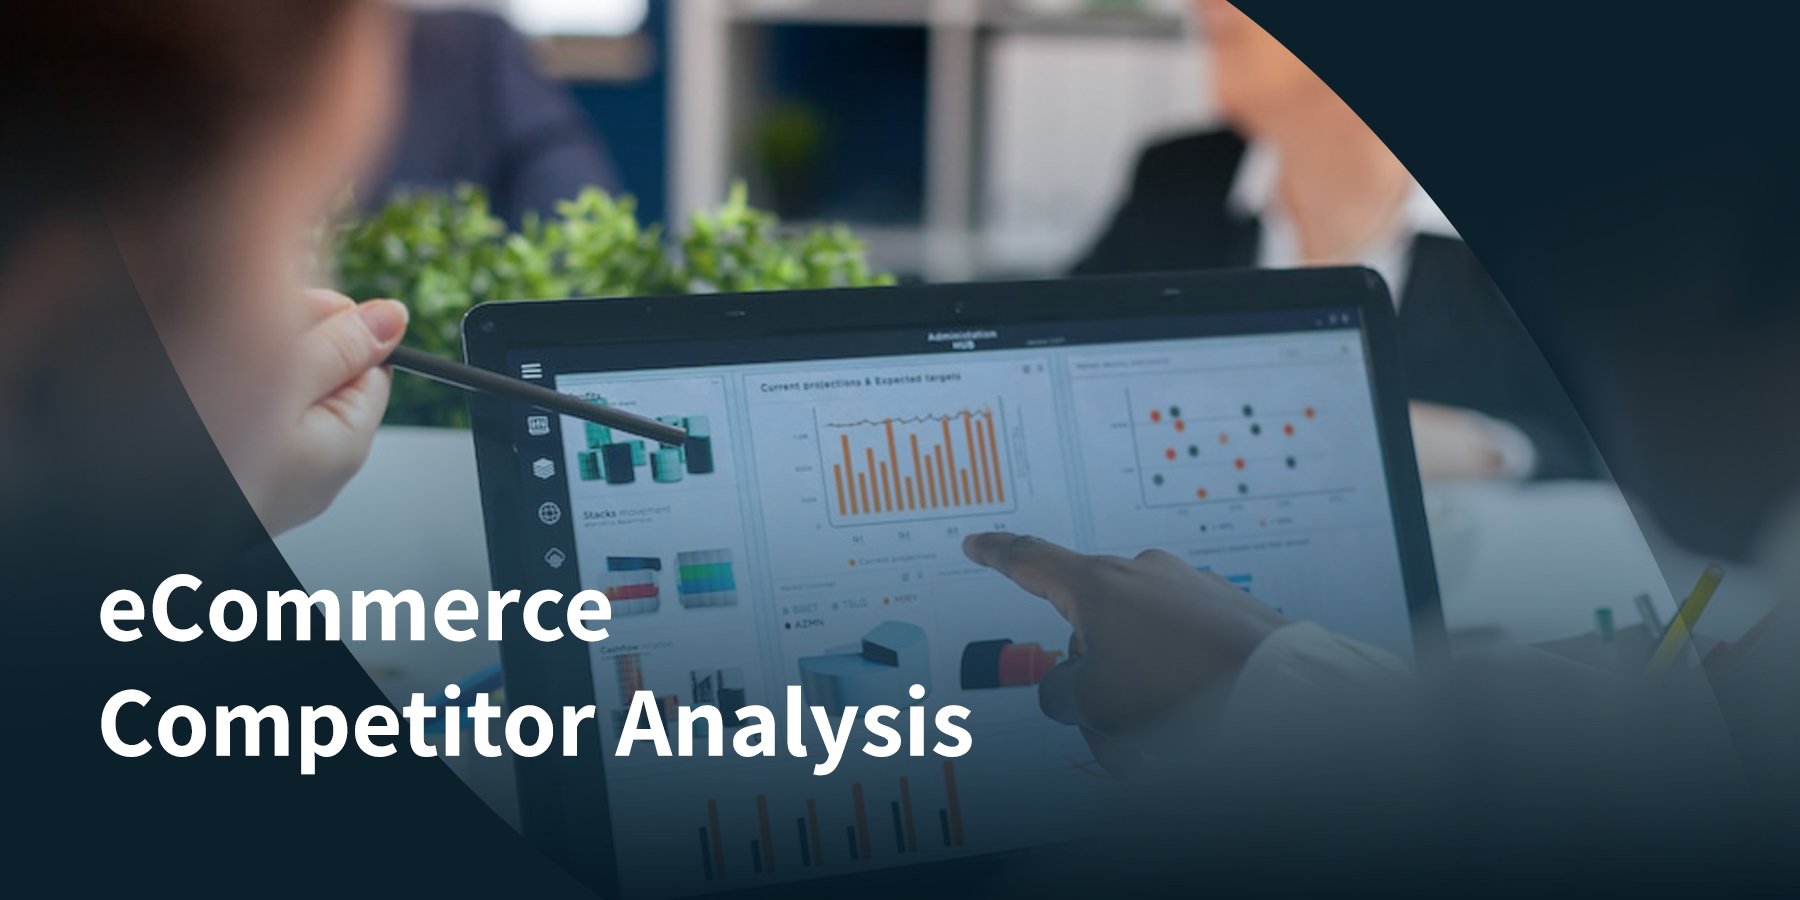 eCommerce Competitor Analysis